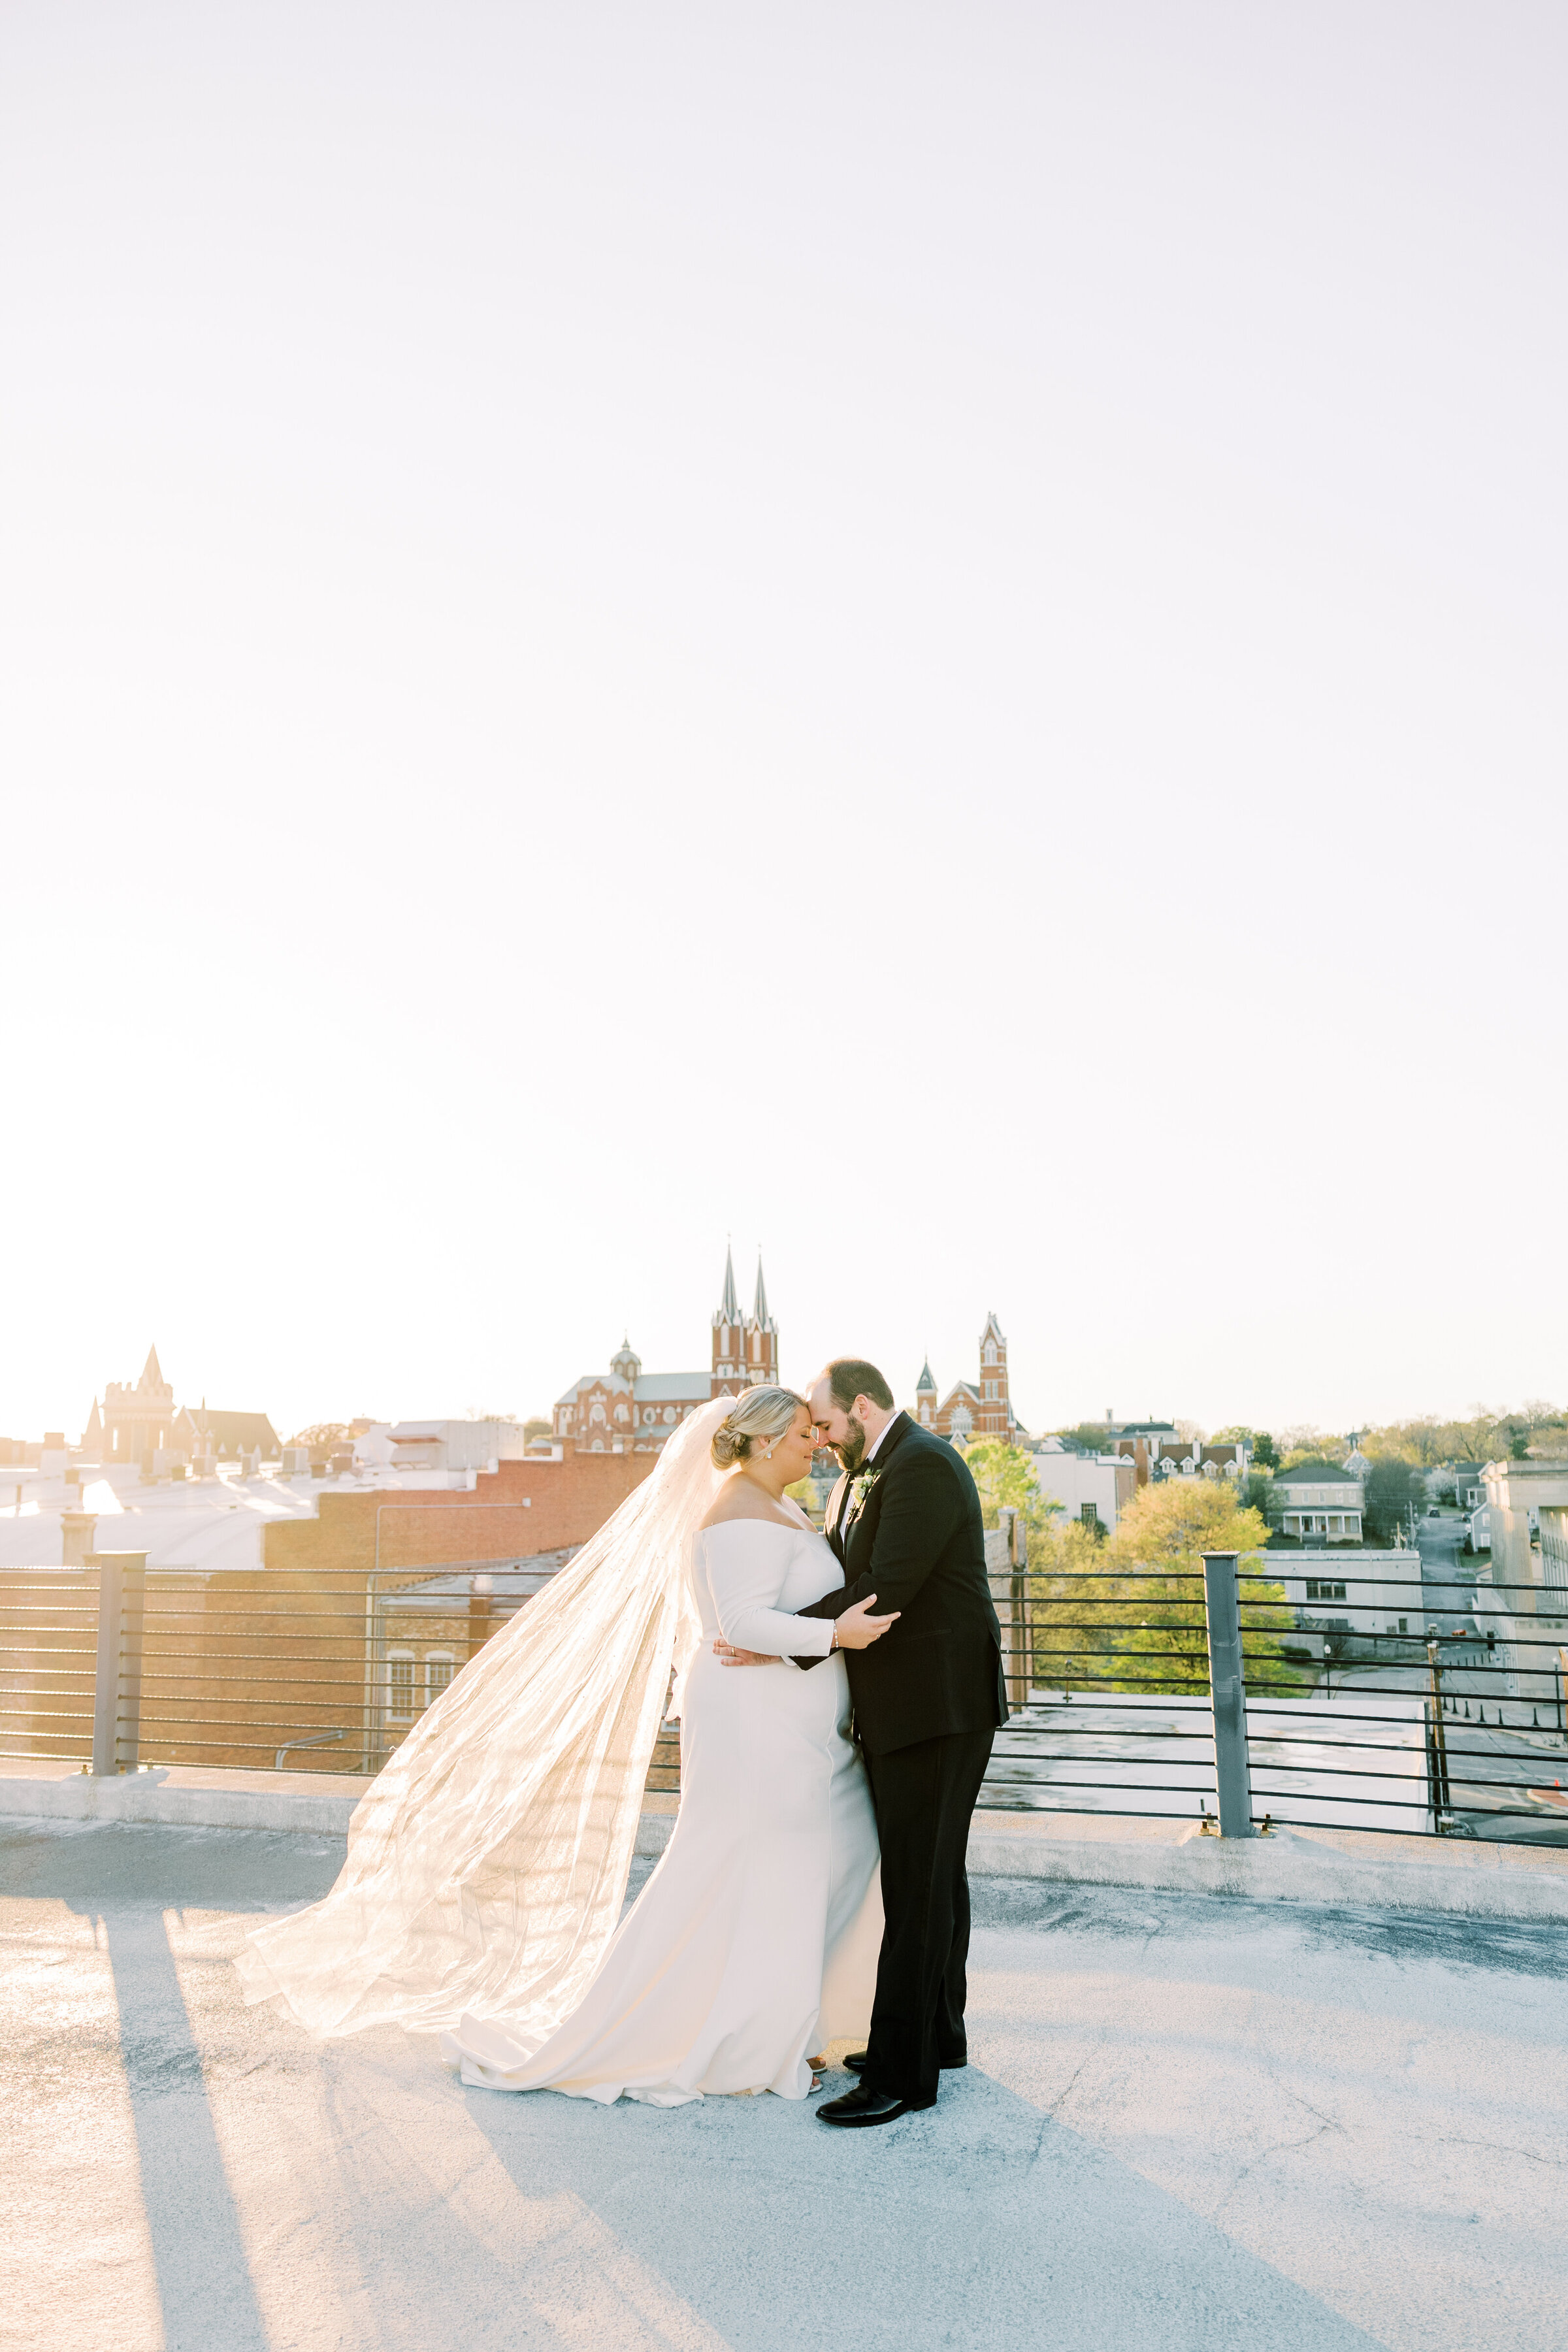 Bride and groom embracing outside with skyline behind